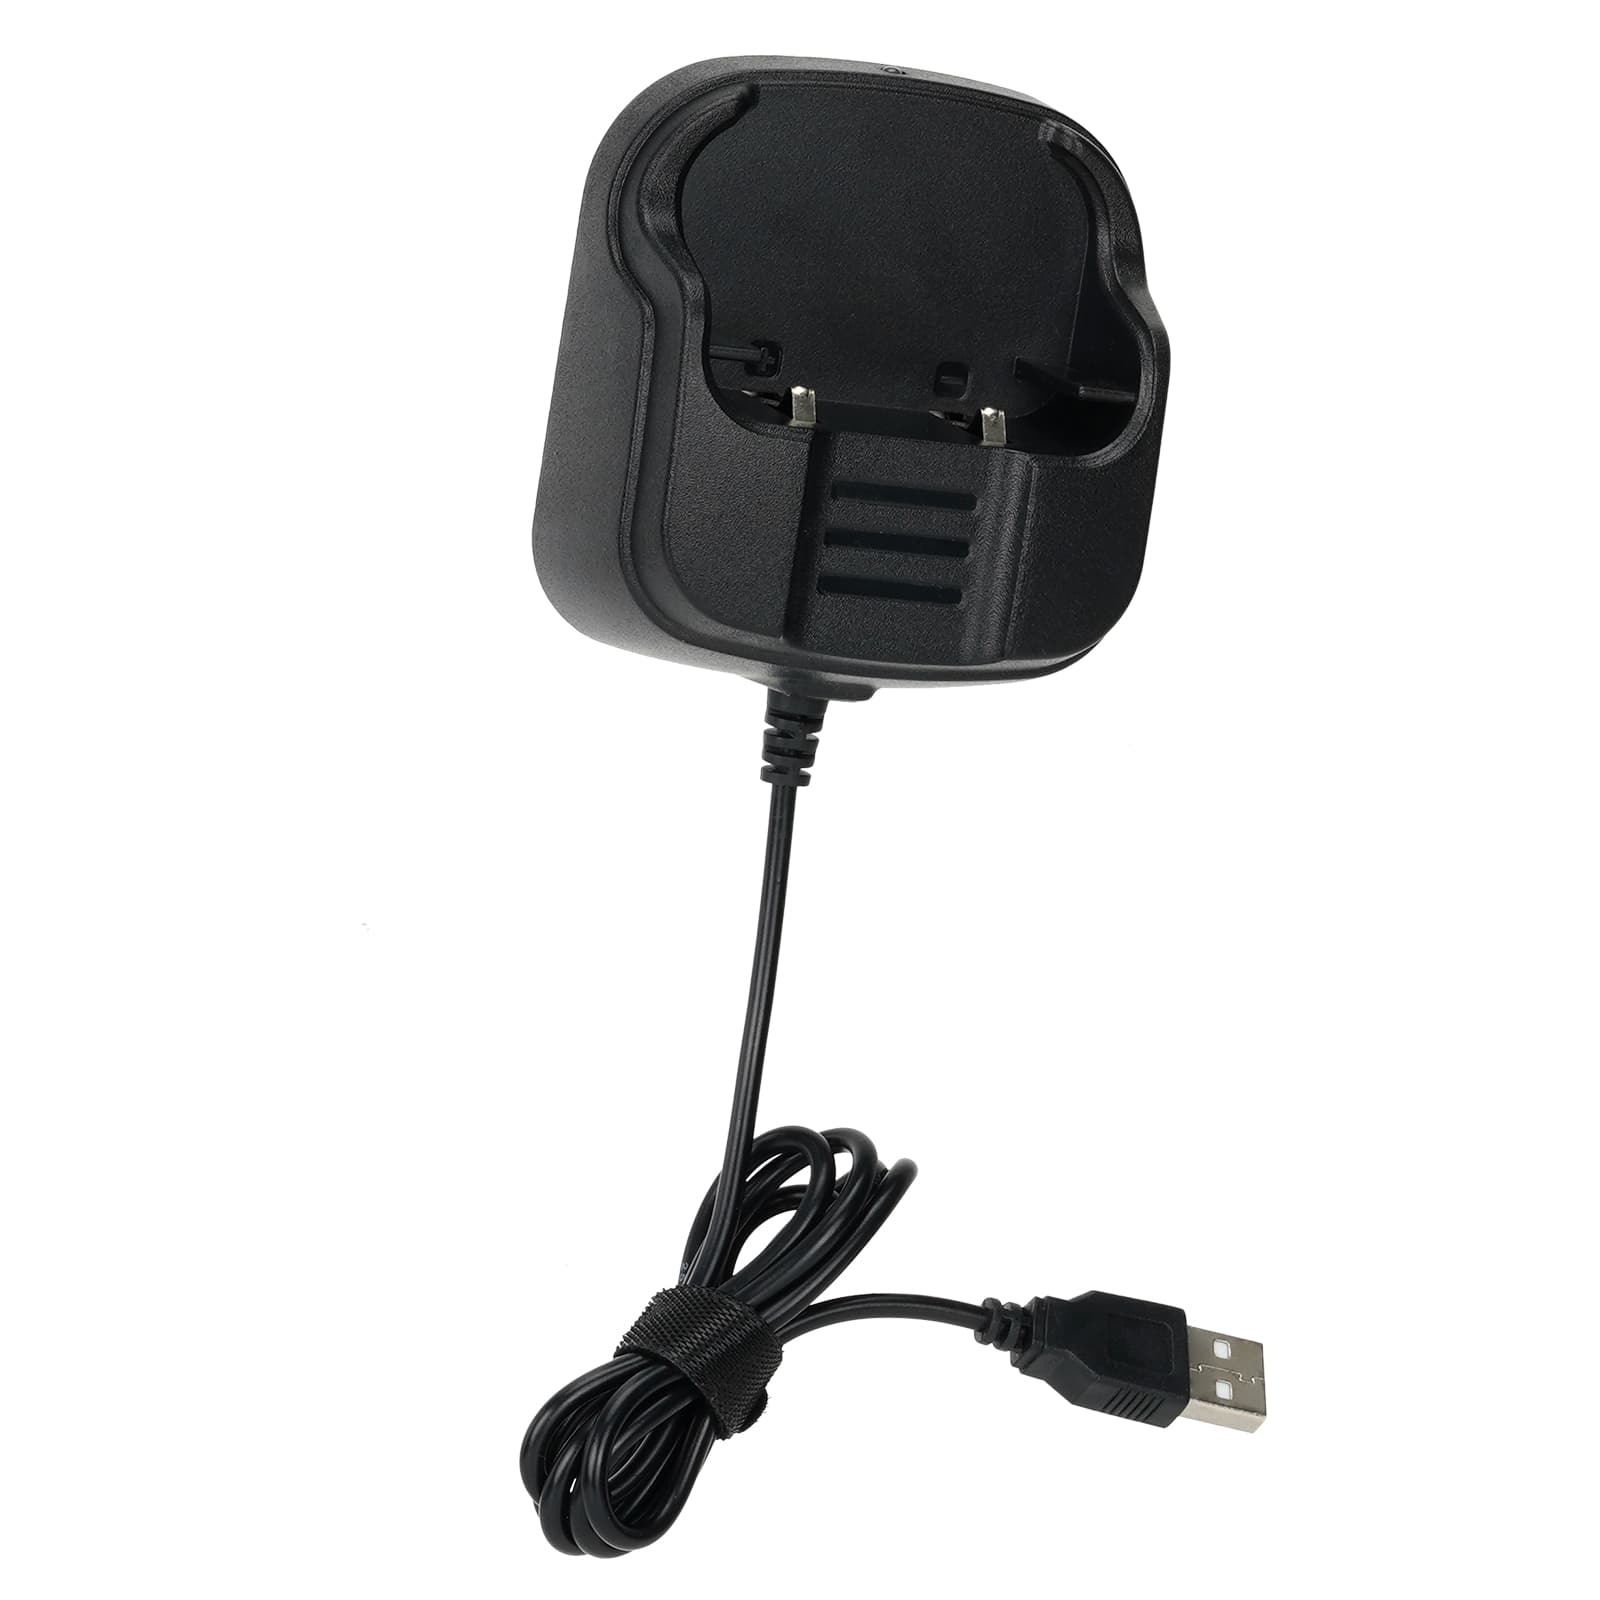 Original USB Charger Cradle for Retevis RT68 RT668